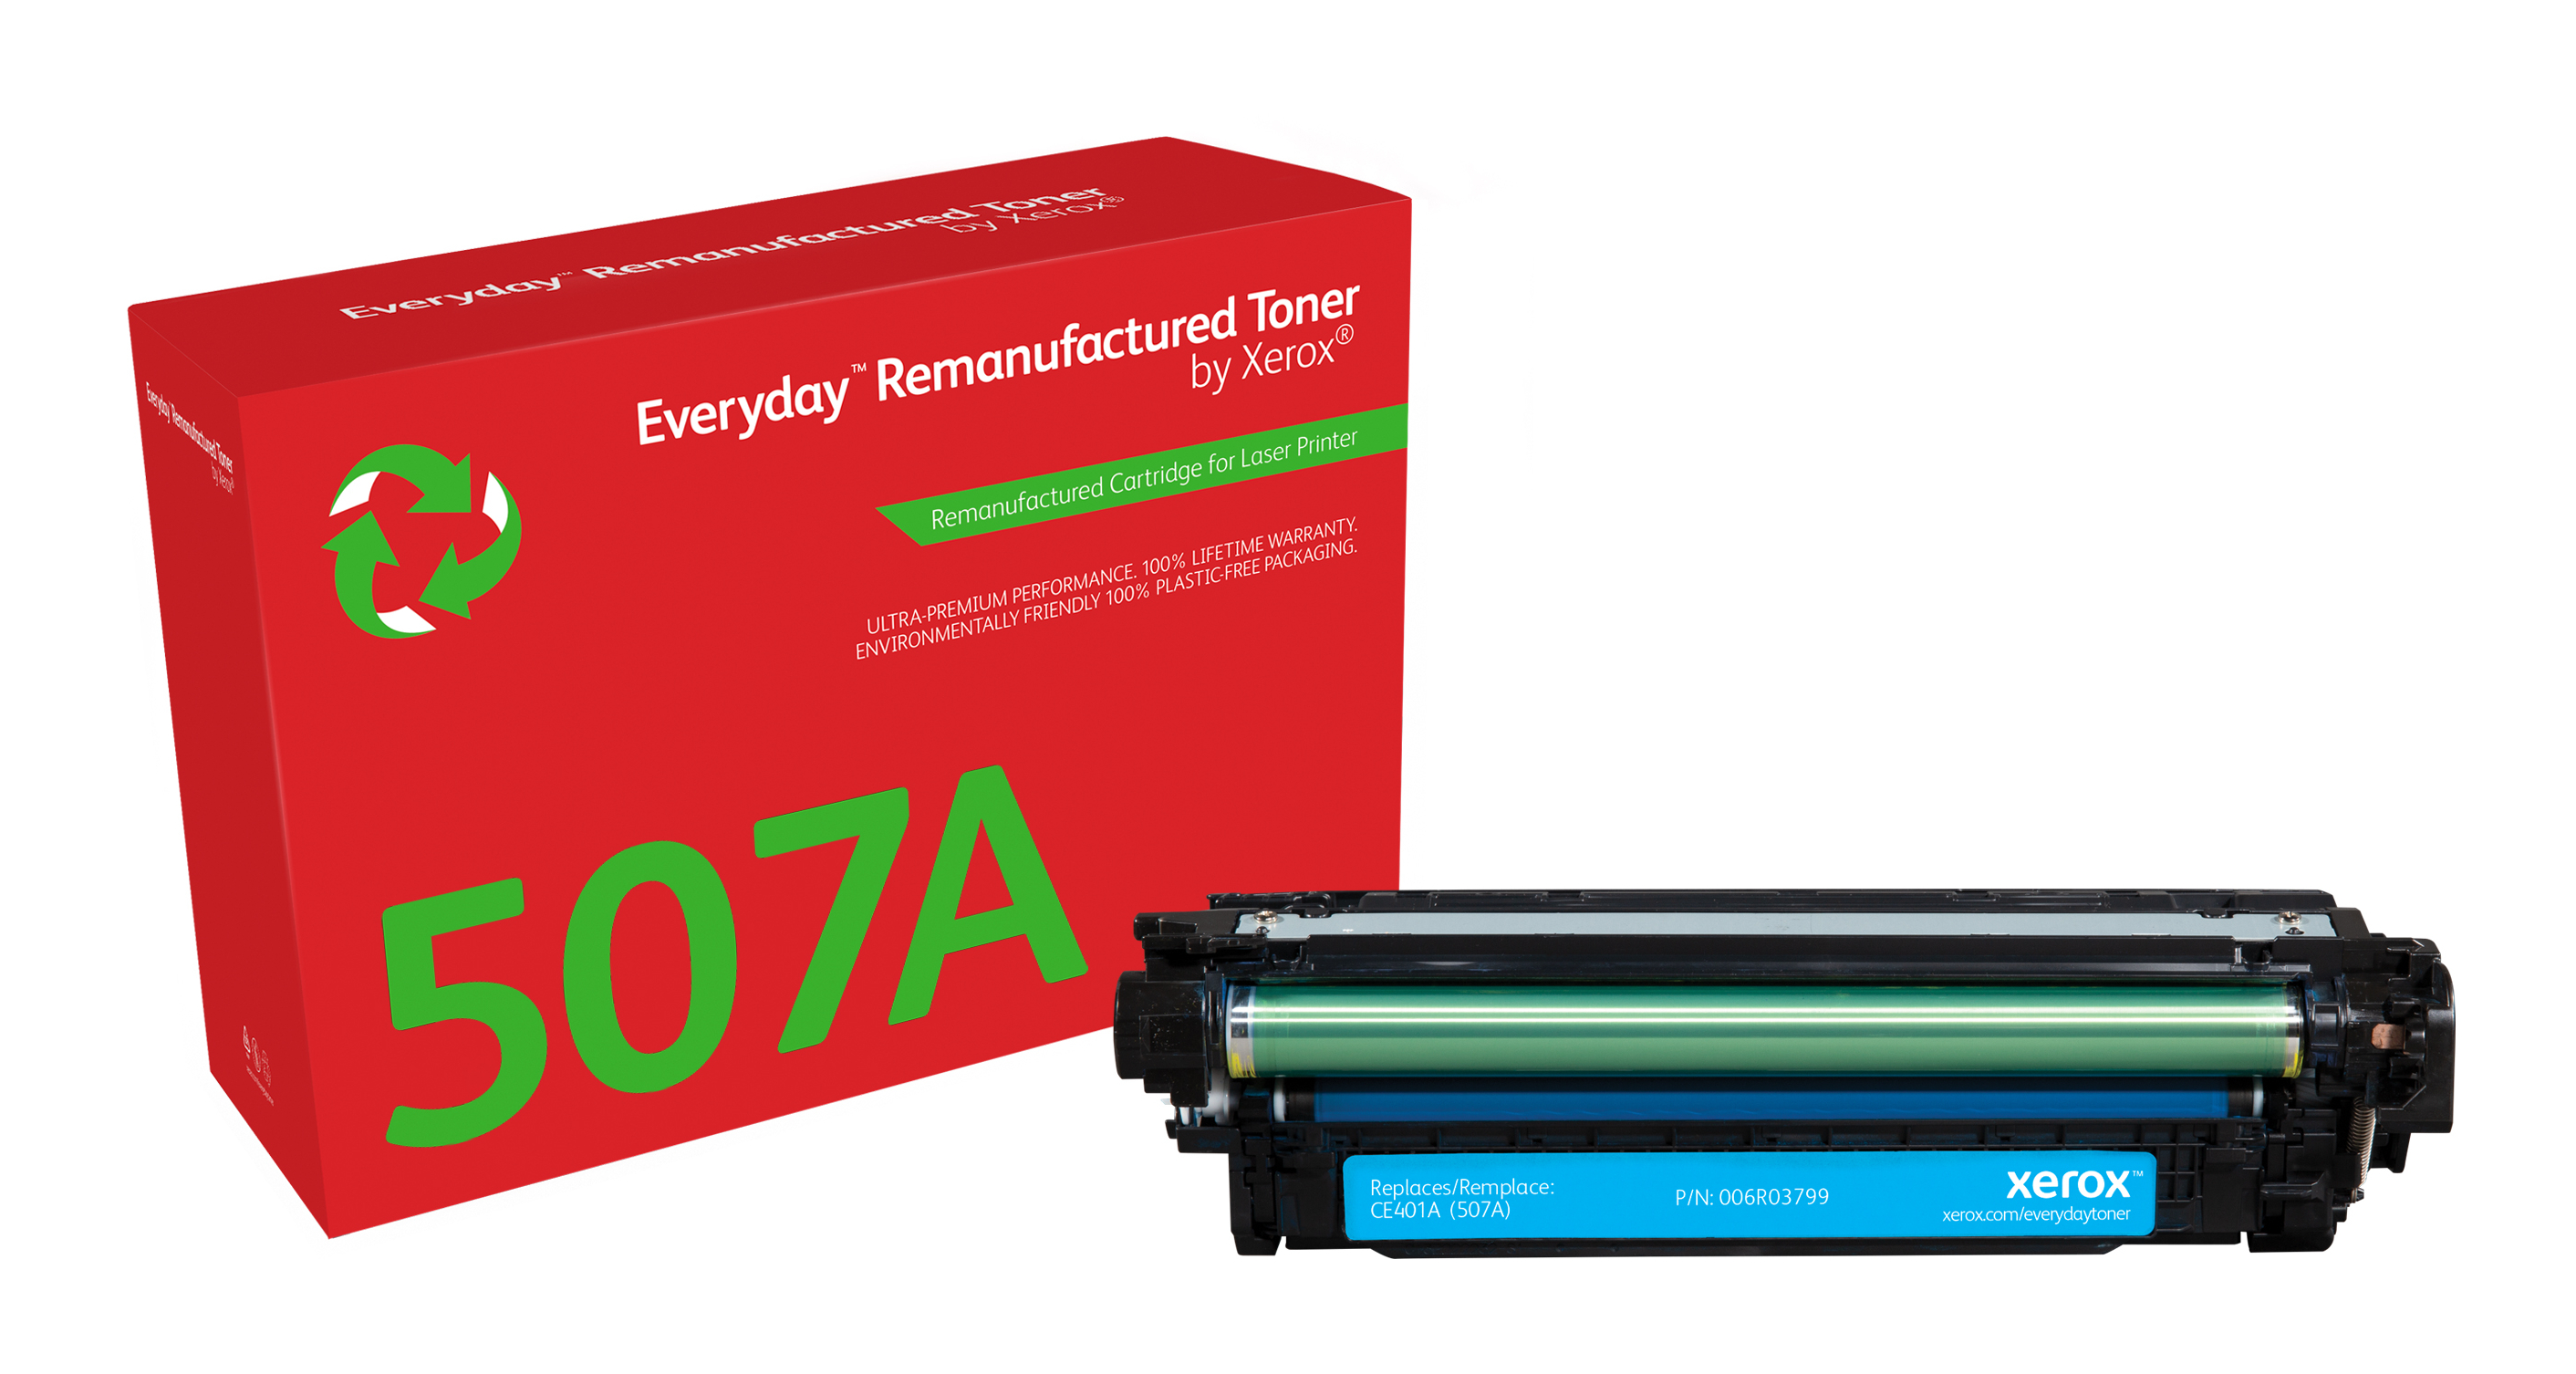 Everyday Cyan Toner compatible with HP CE401A, Standard Yield 006R03799 by  Xerox